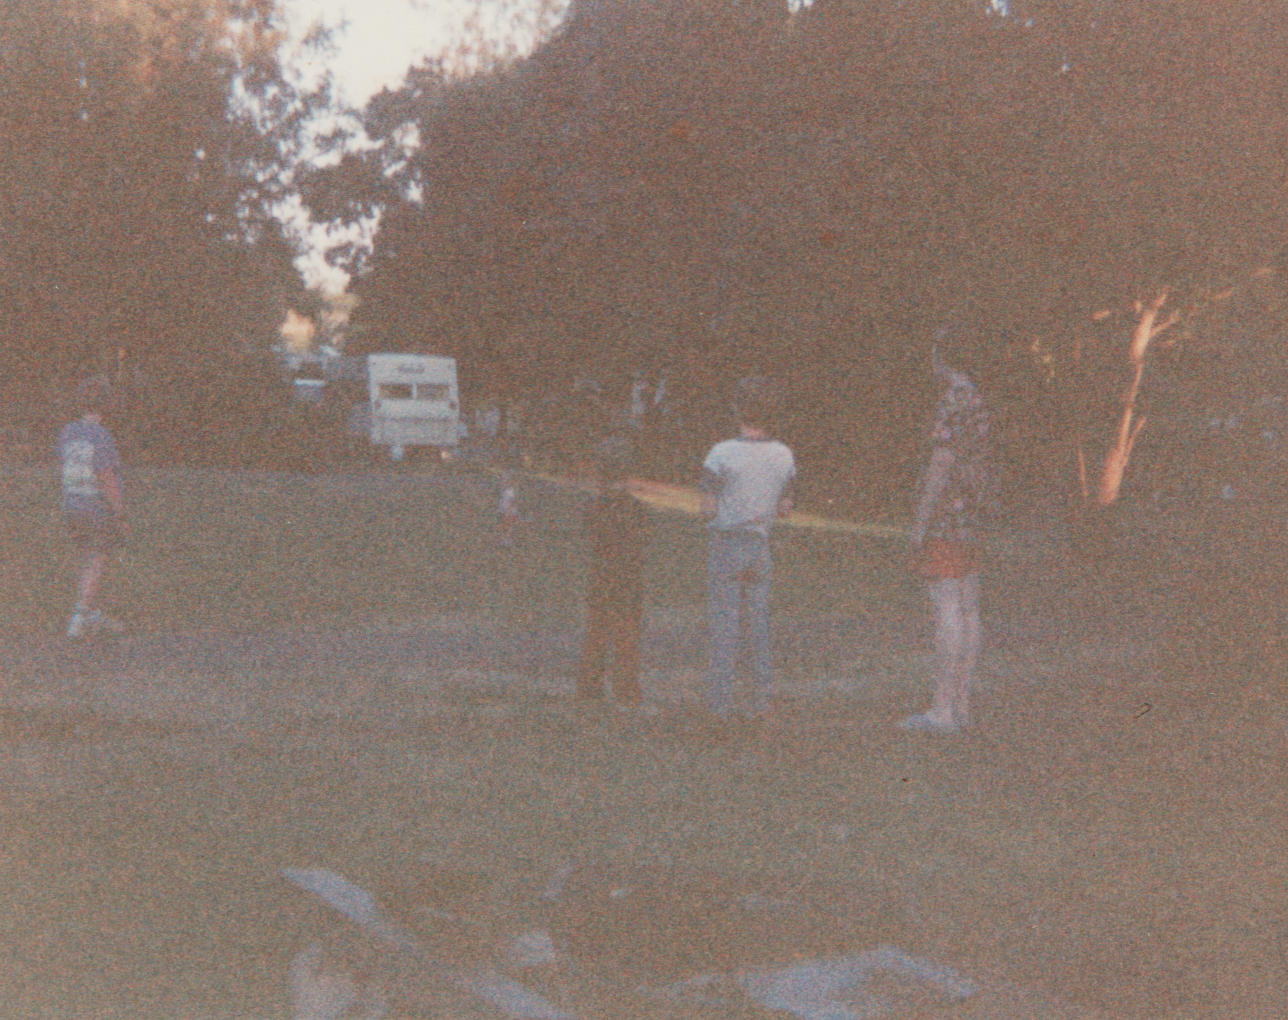 1991-08 - Camping - Joey, Rick, Crystal, Katie, mom, dad, others, tent, picnic table, field, food, playing, includes maybe Sunday or weekend-6.png